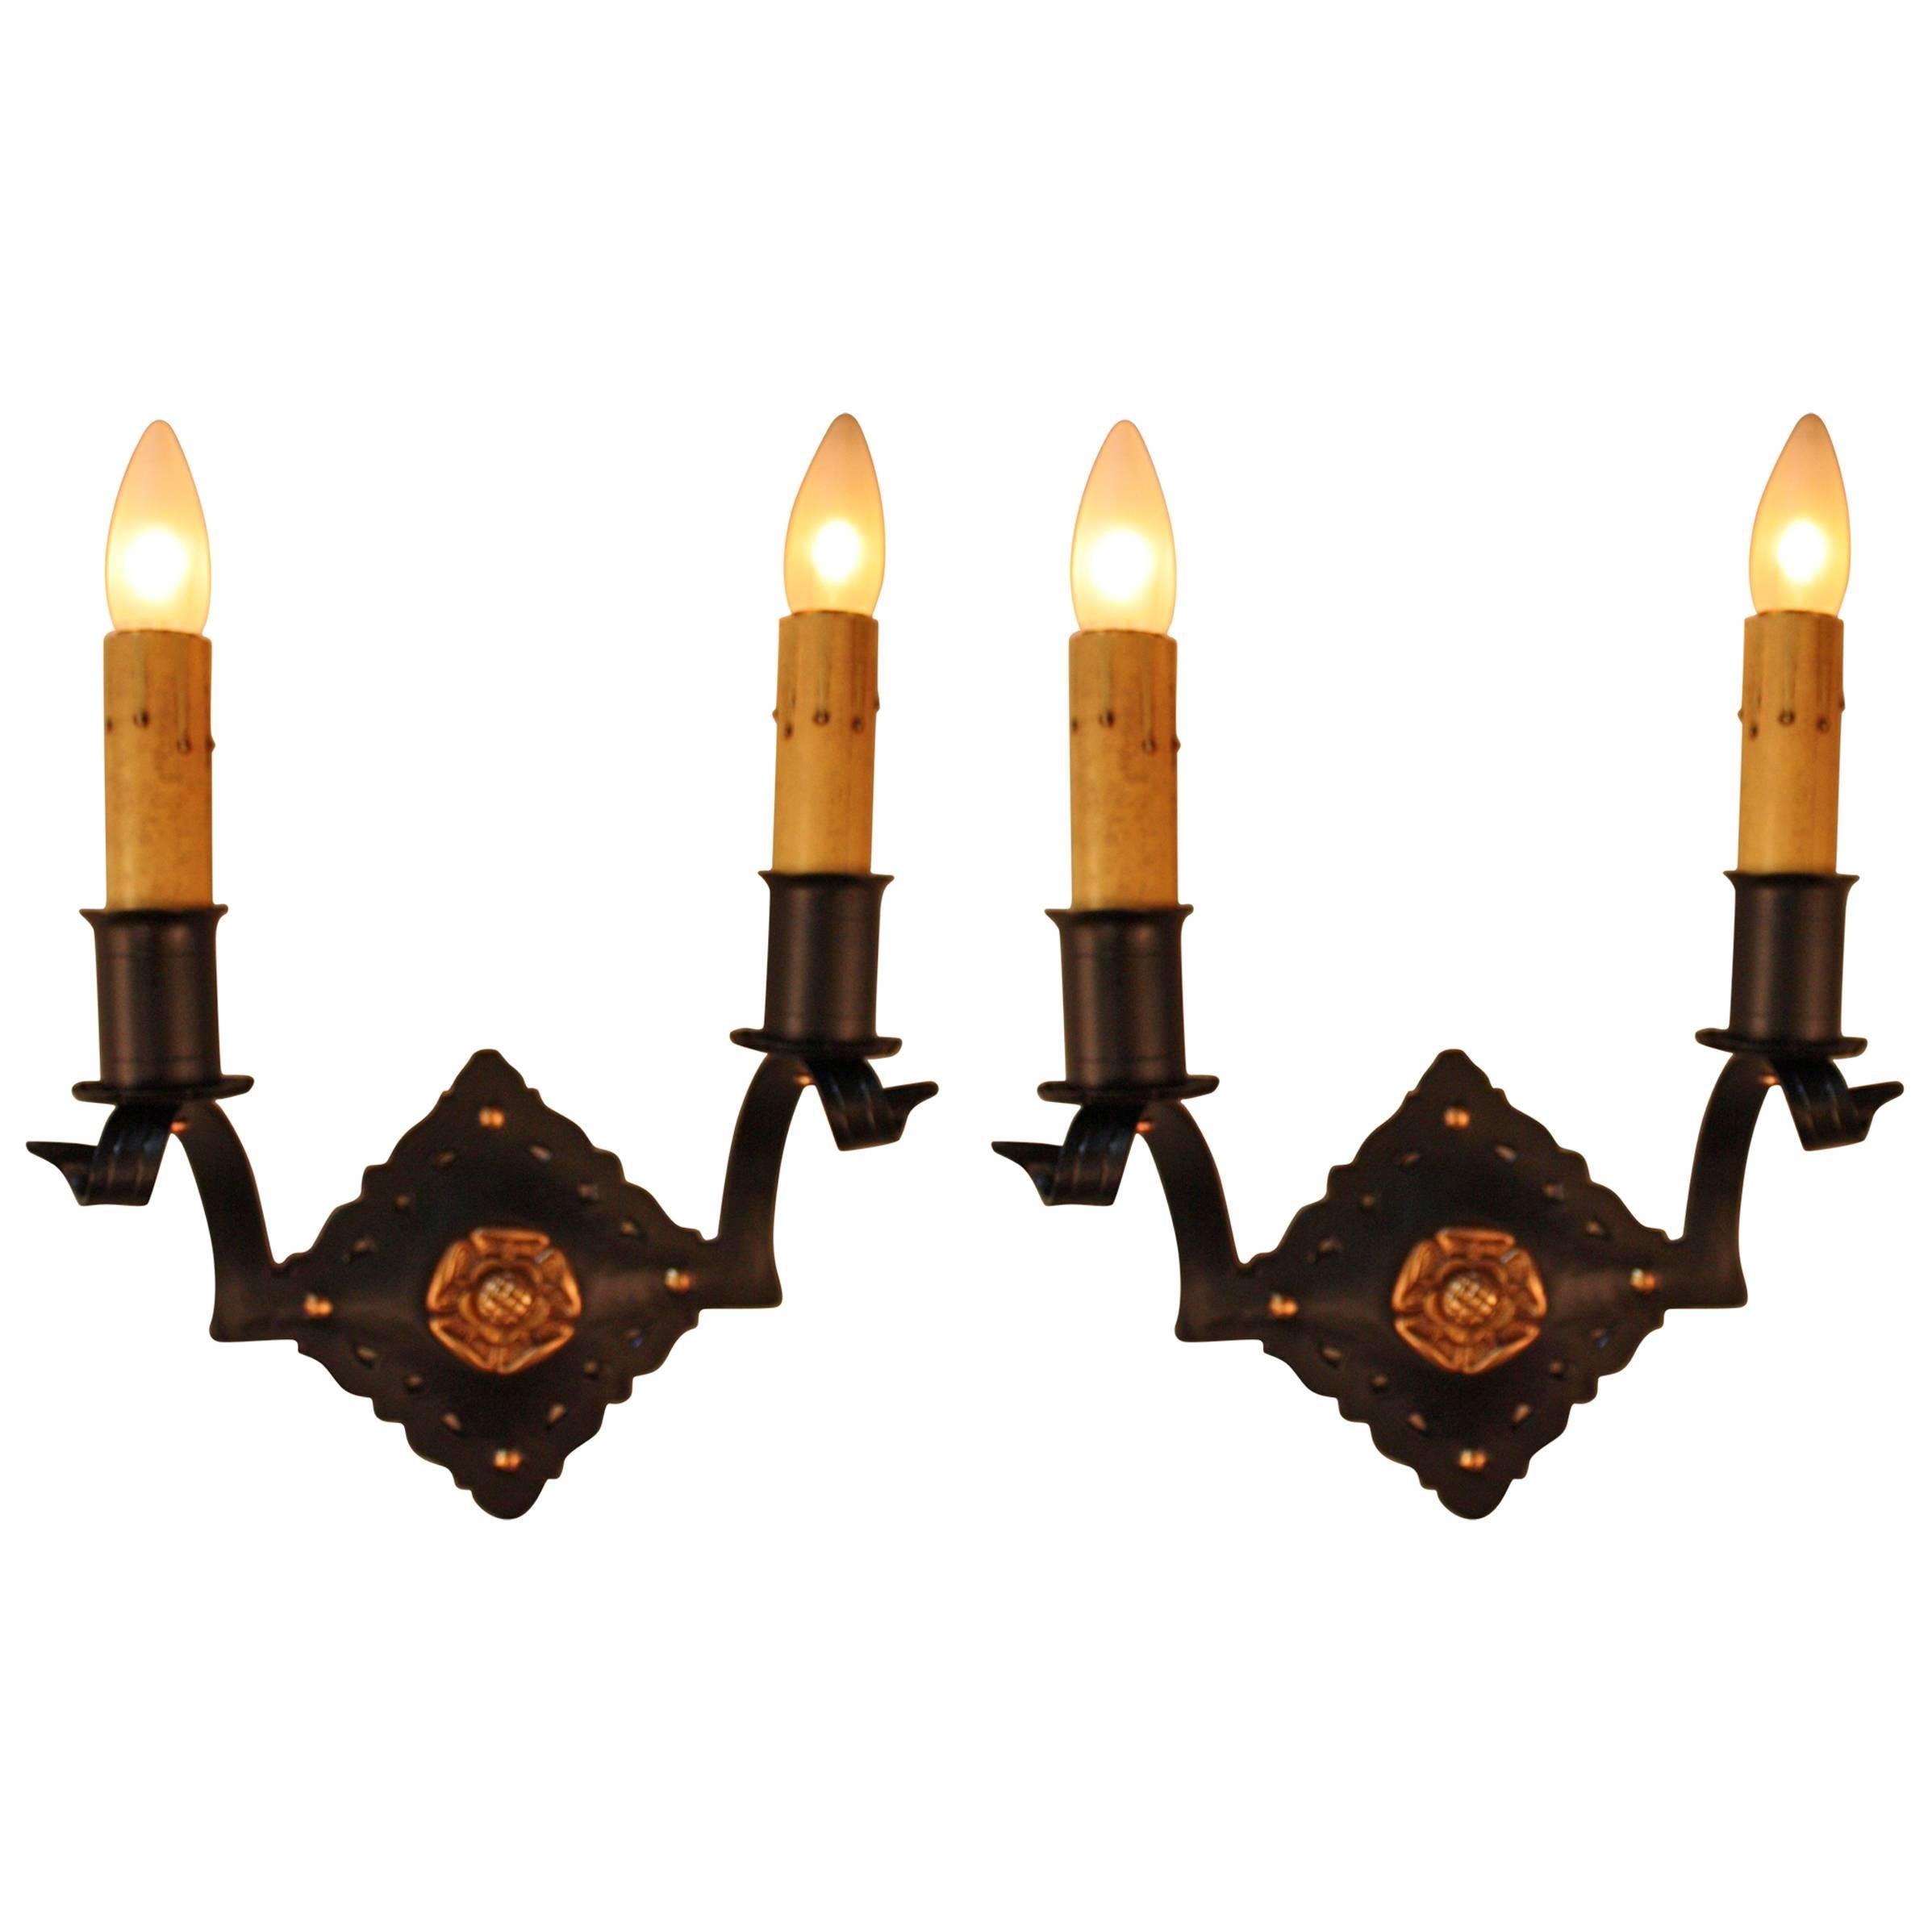 Pair of Handcrafted Bronze Wall Sconces